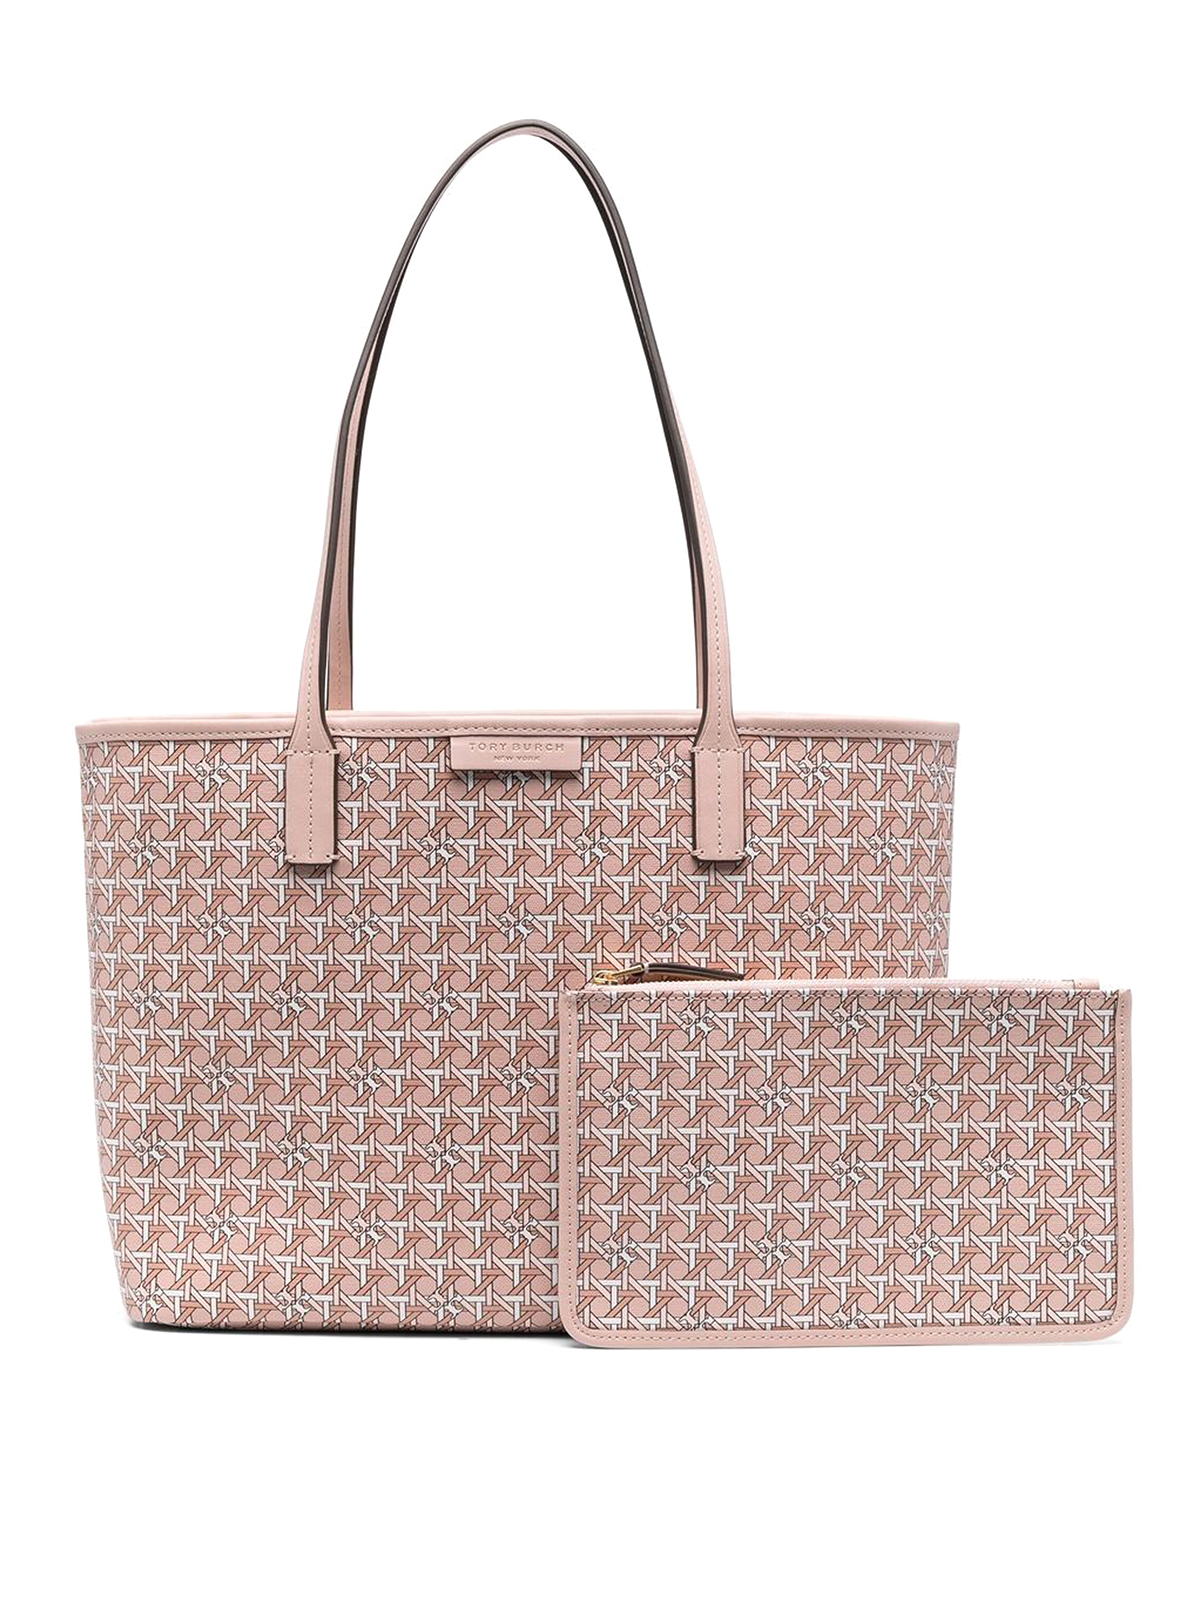 Tory Burch Ever Ready Tote Bag in Gray